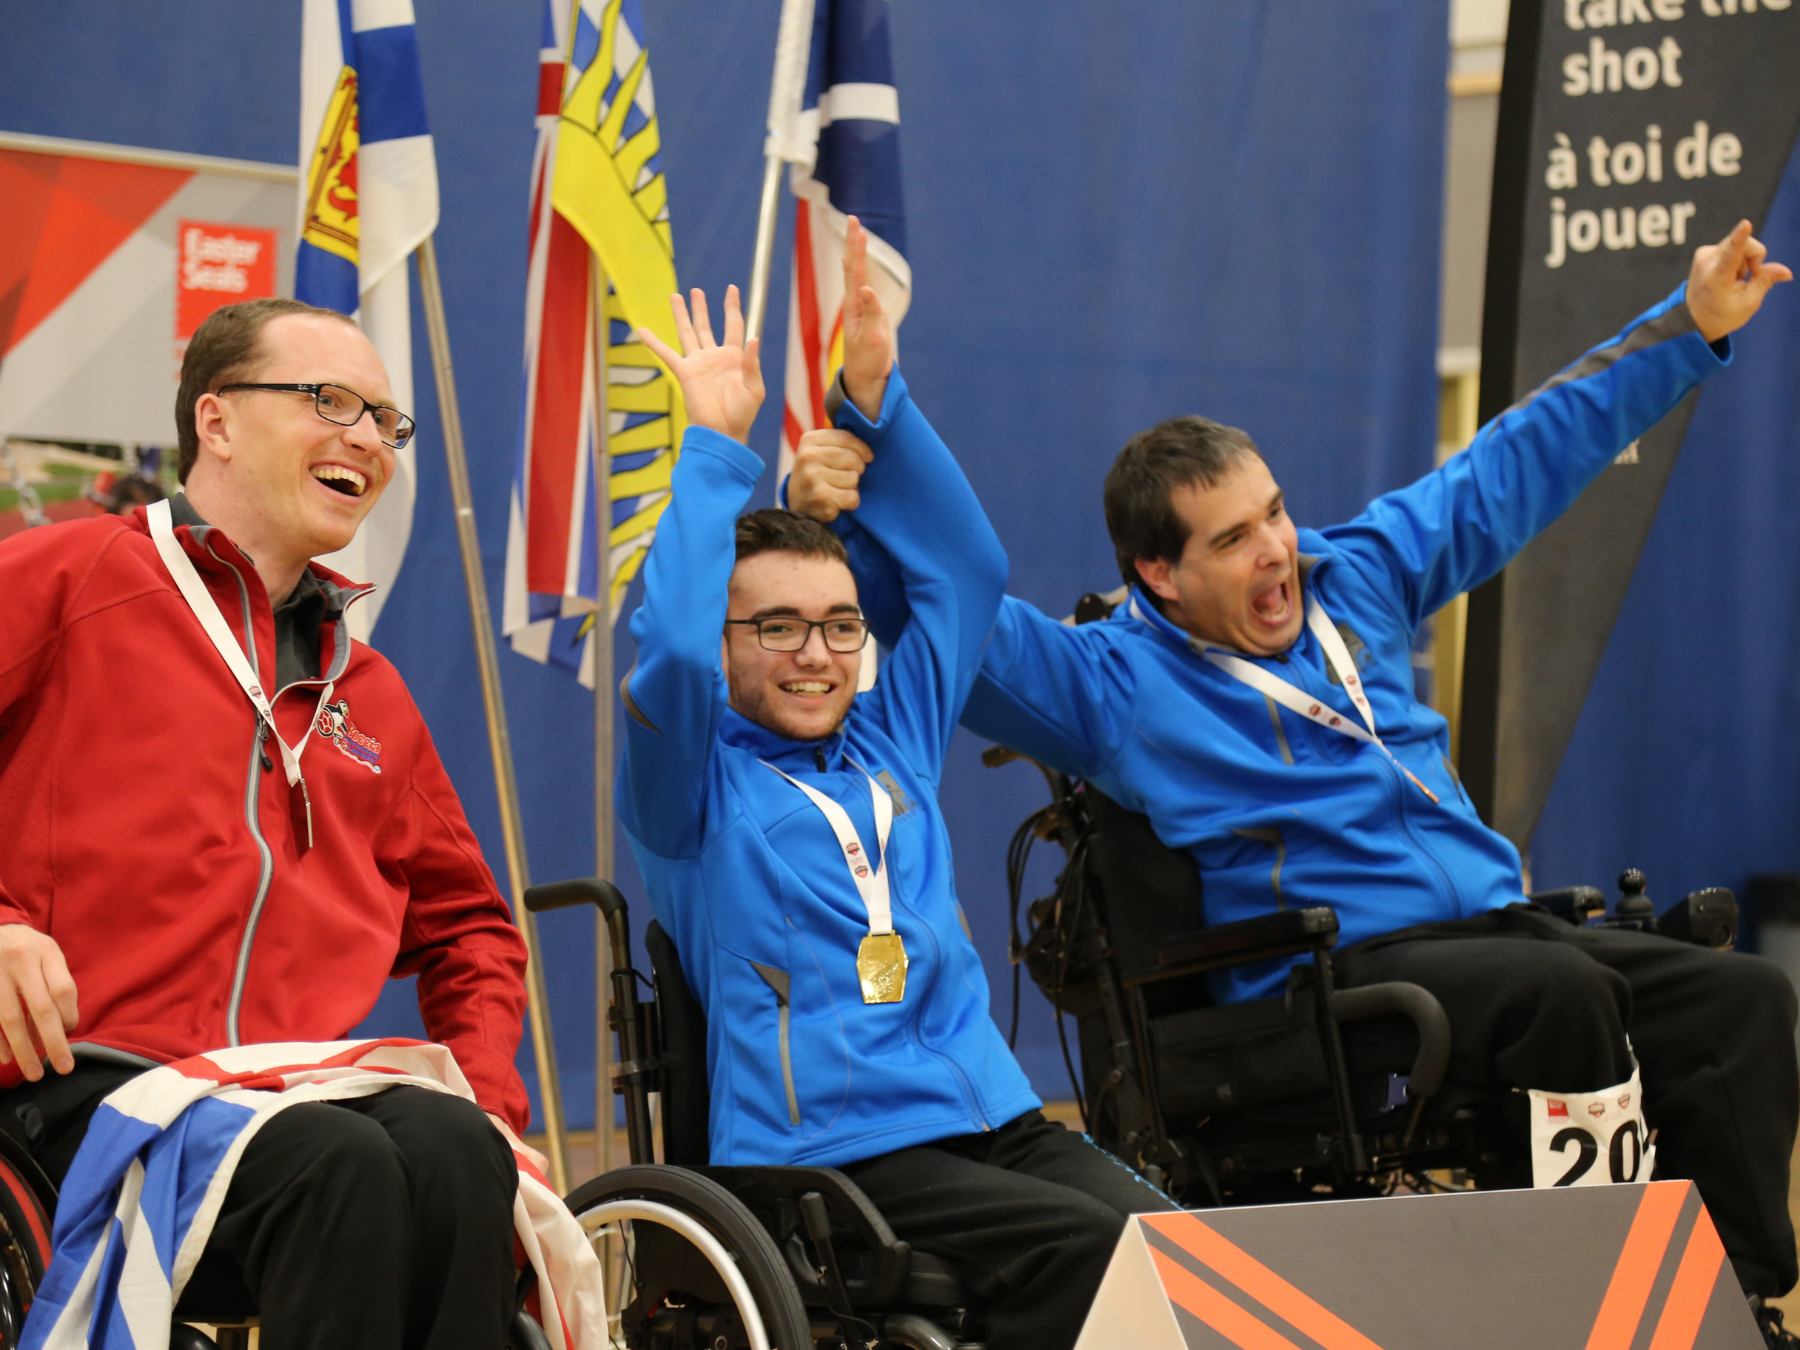 Mike Mercer, Danik Allard and Dave Richer with their medals at 2018 Canadian Championships | Mike Mercer, Danik Allard et Dave Richer avec leurs médailles aux Championnats canadiens 2018